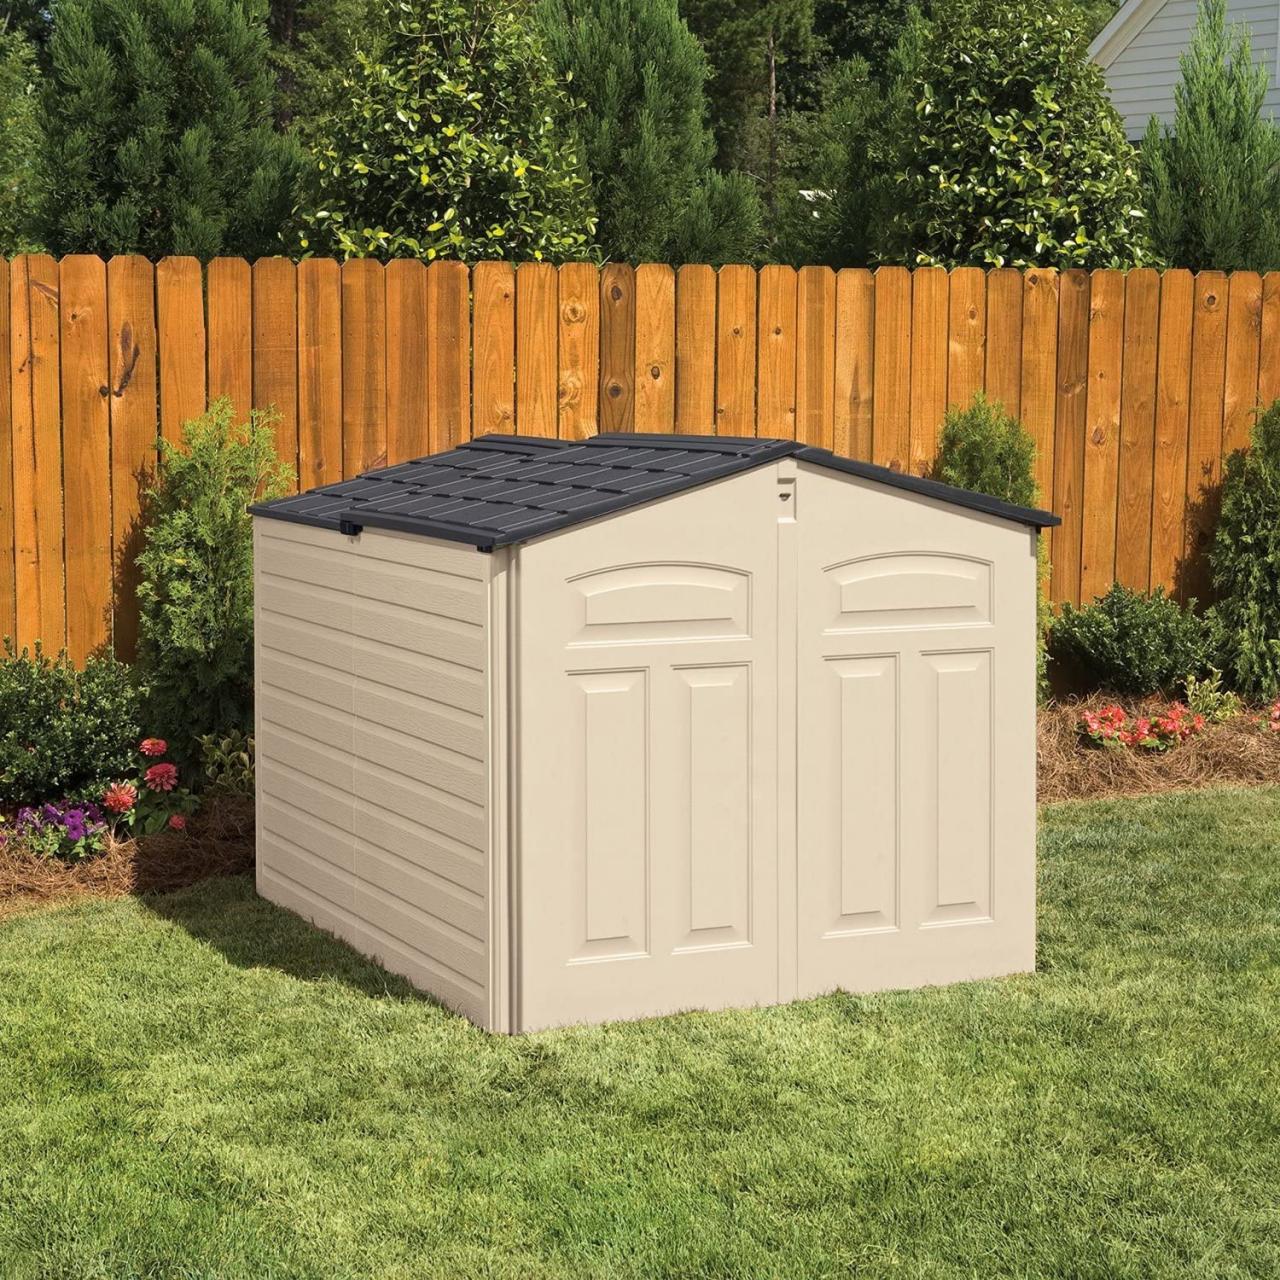 Rubbermaid Plastic Outdoor Bike and Boat Storage Shed - Yours Shed Builders  | Bike storage, Outdoor bike storage, Bike shed